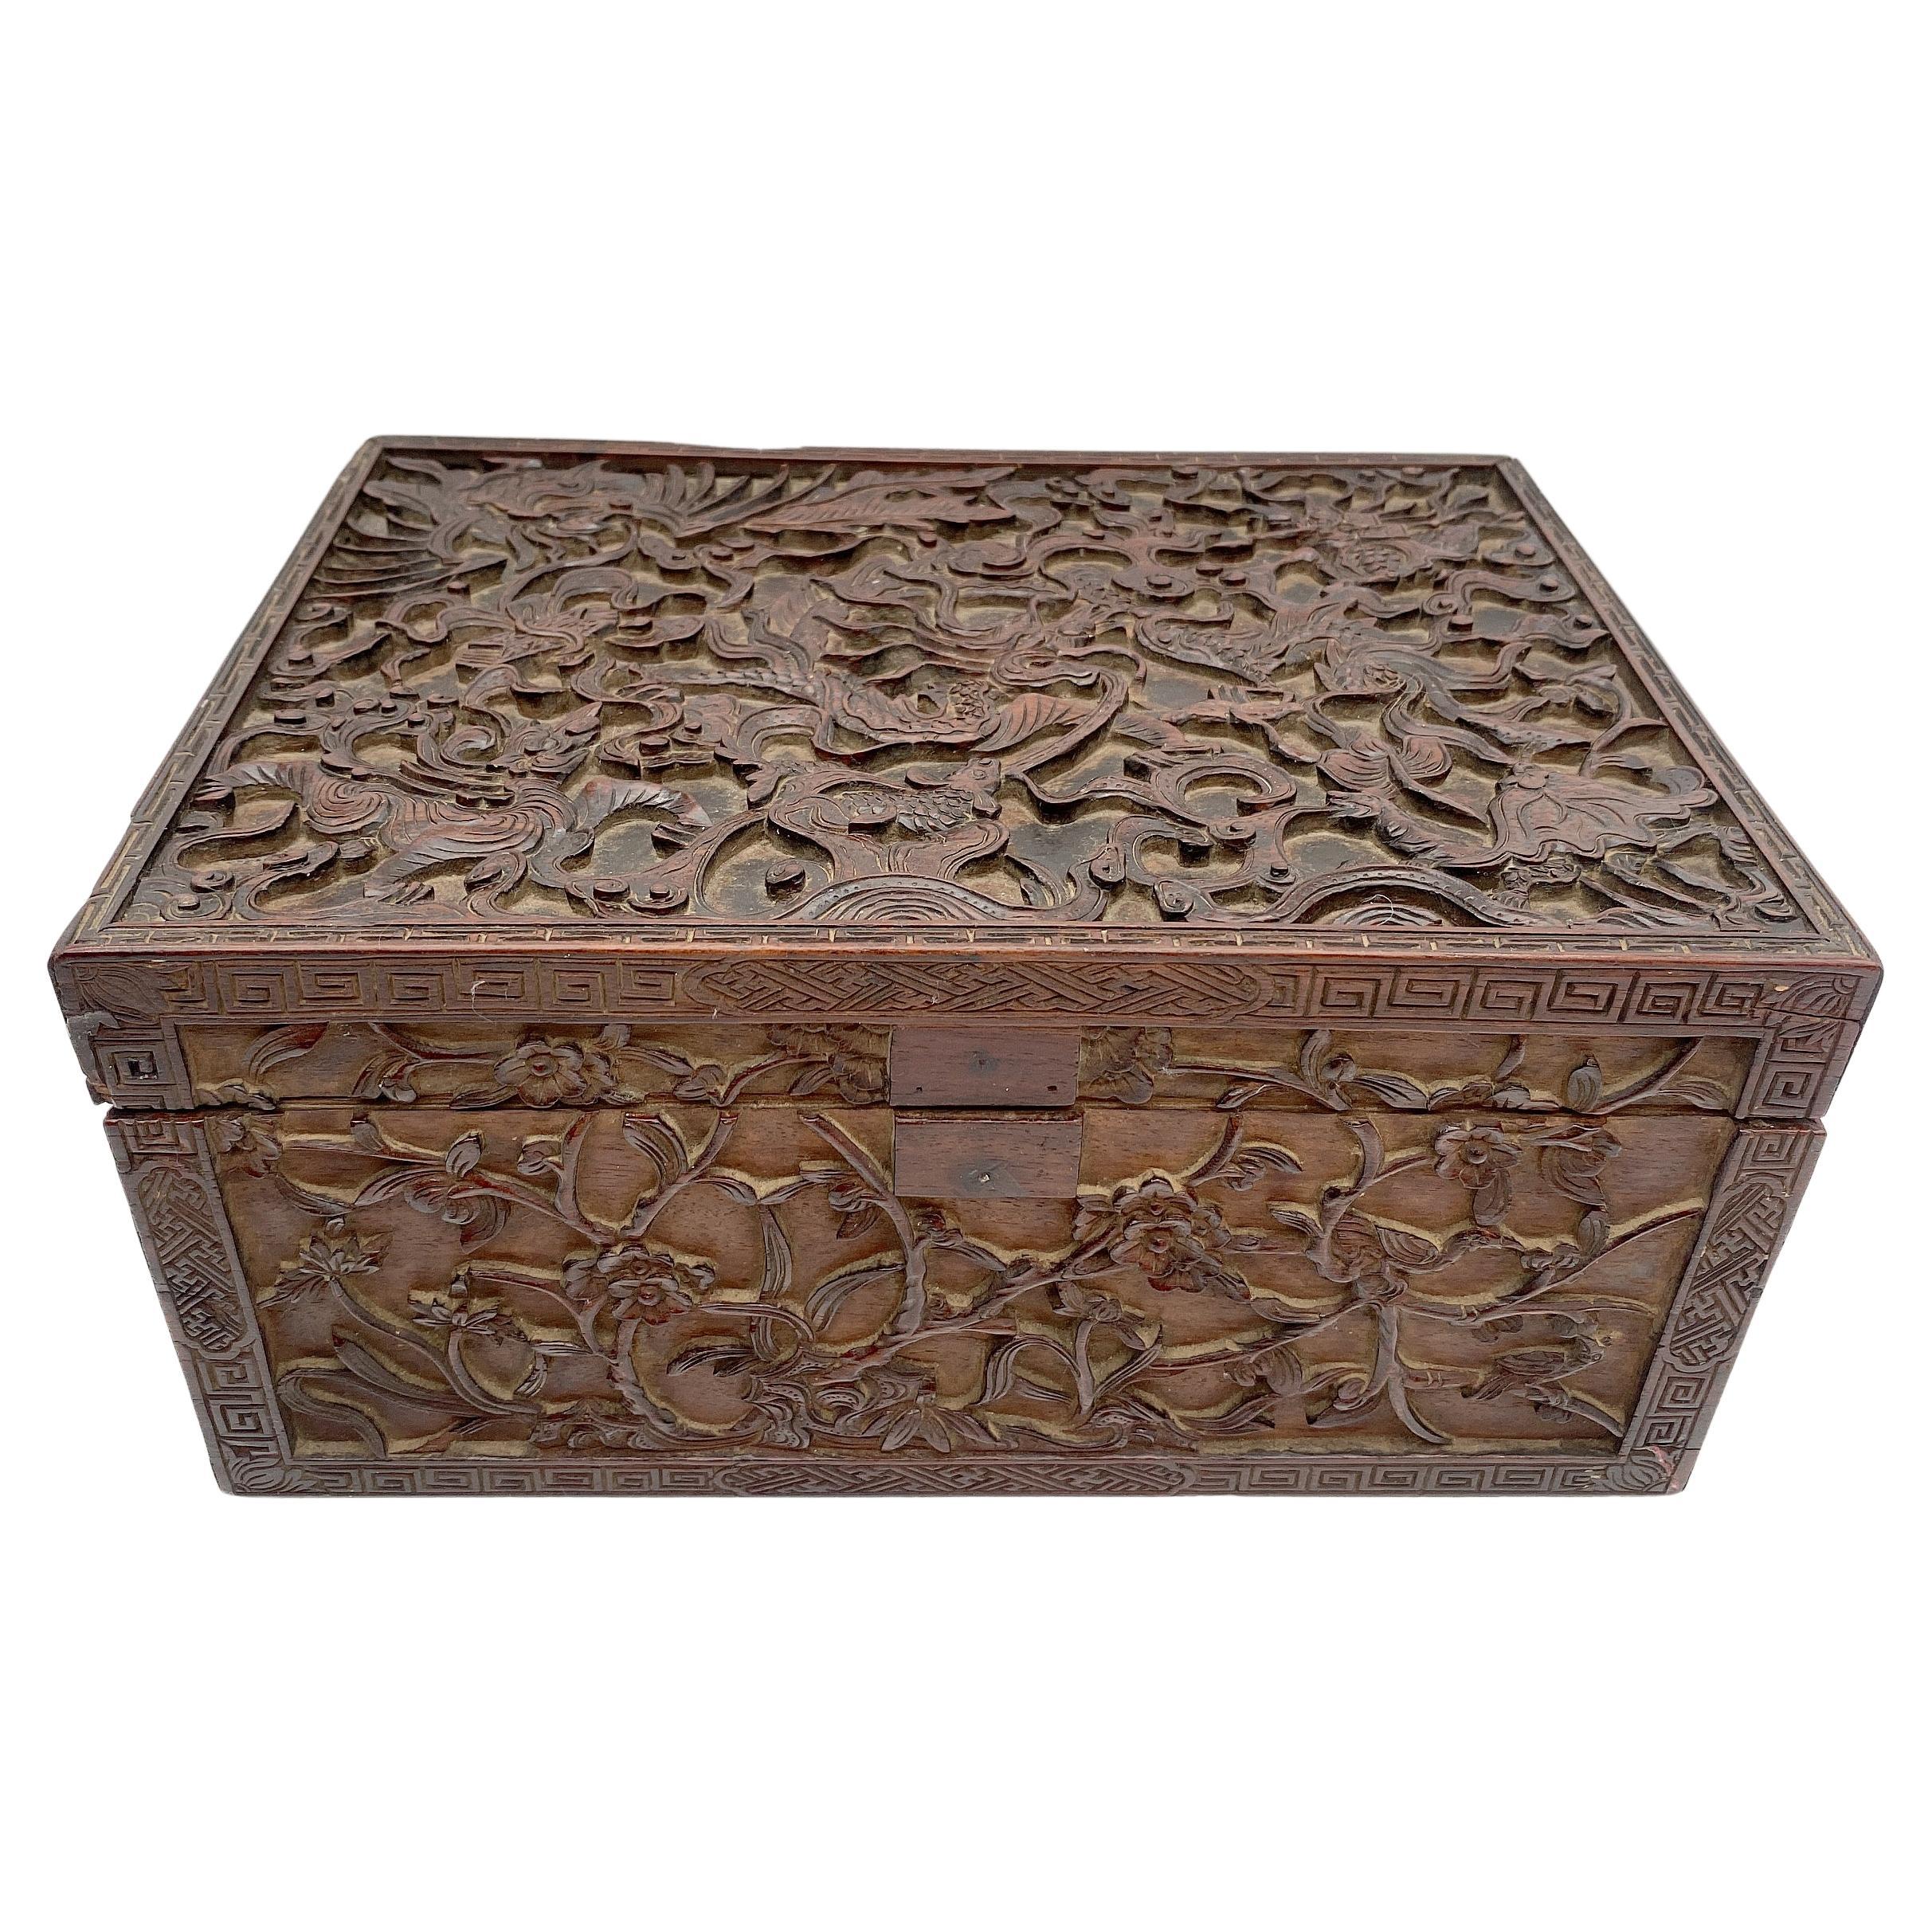 19th Century Chinese Wooden Rectangular 'Mythical Beasts' Box